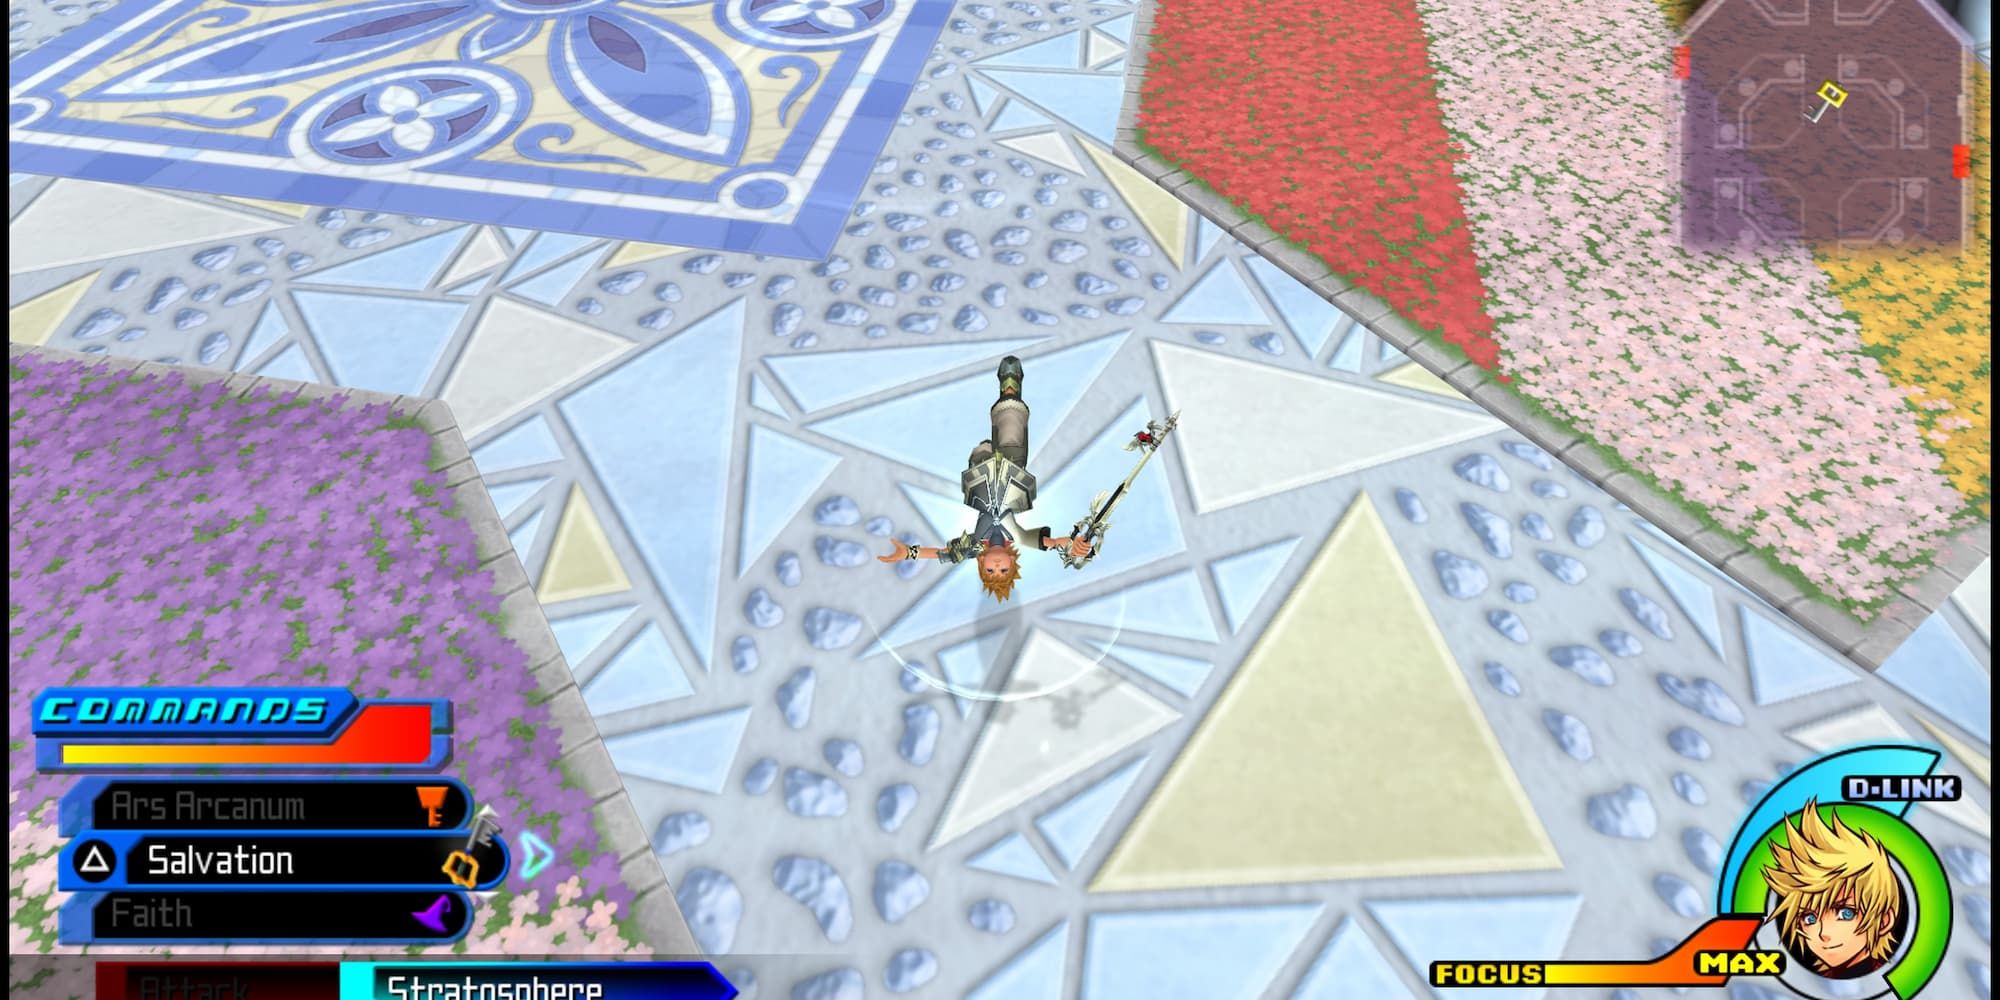 Ventus upside down whilst using Stratosphere